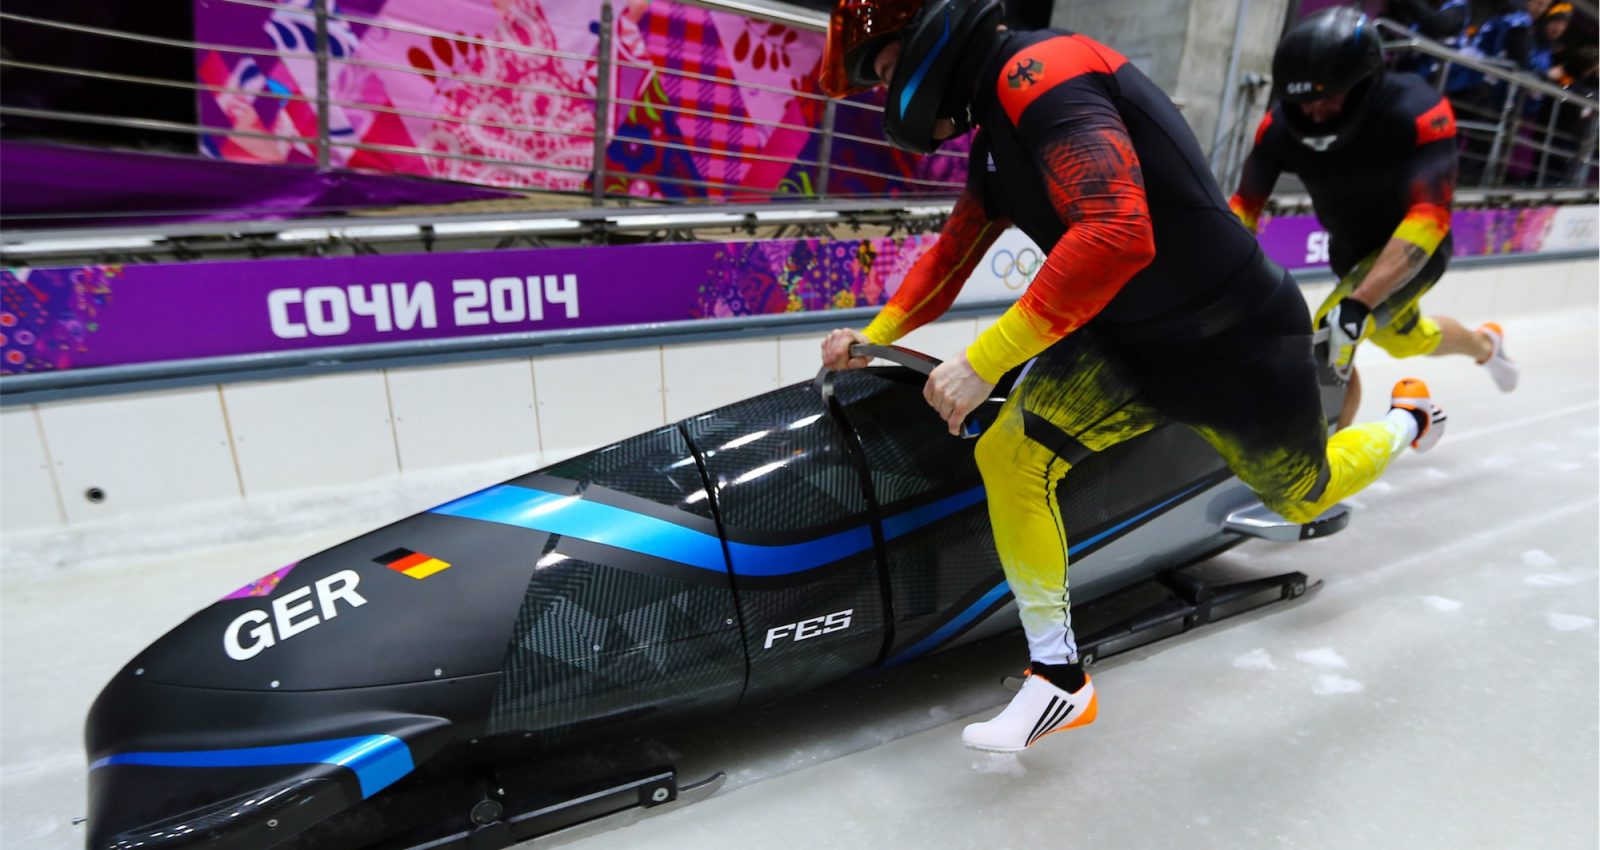 Bobsleigh and Skeleton